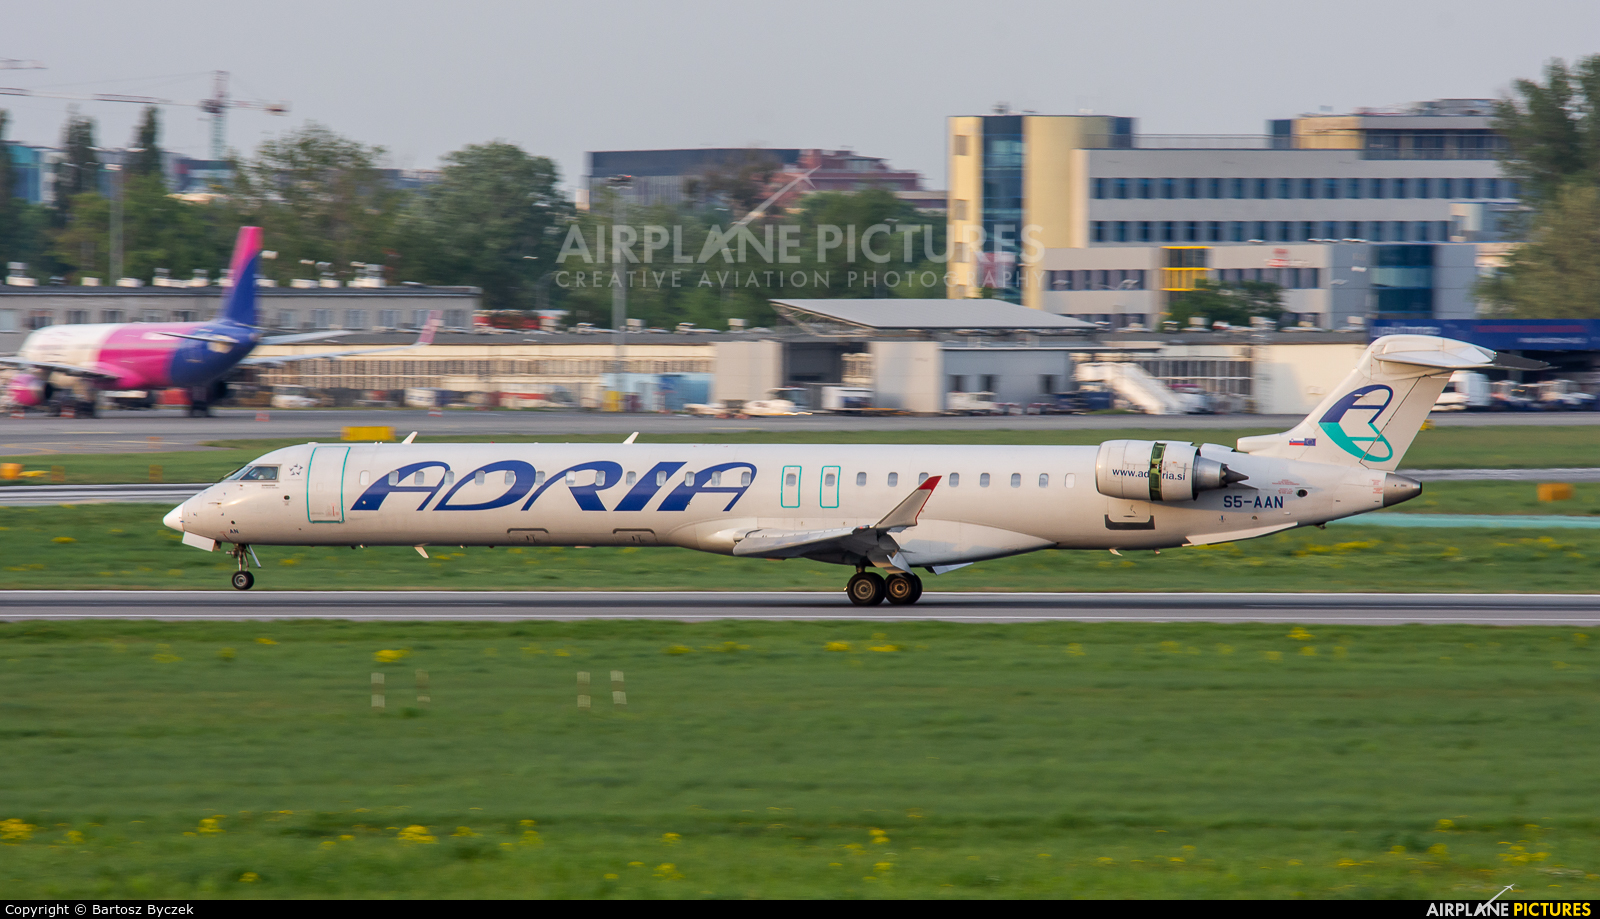 Adria Airways S5-AAN aircraft at Warsaw - Frederic Chopin